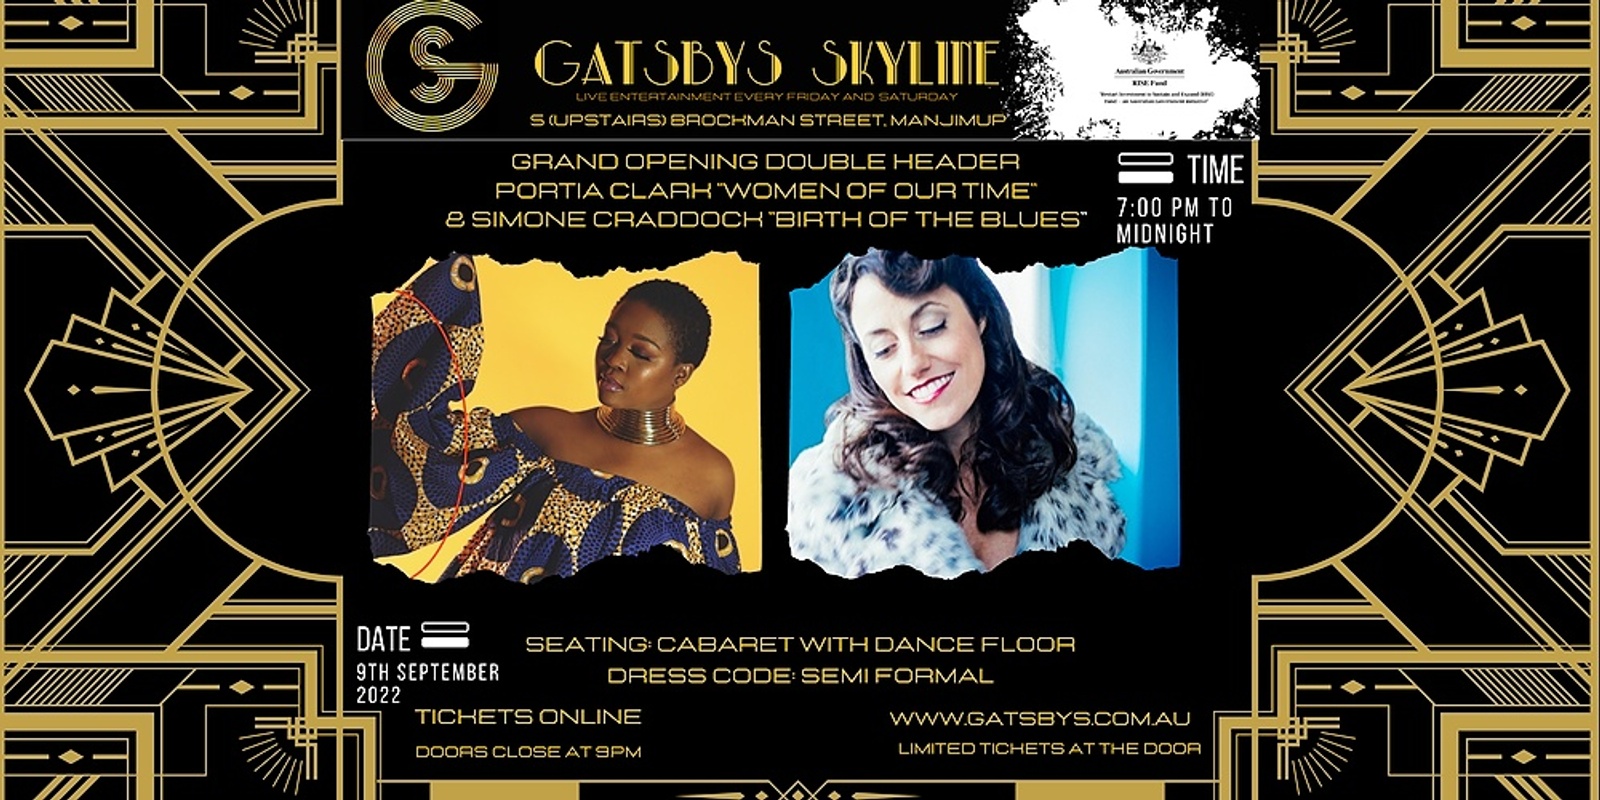 Banner image for Grand Opening Double Header - Portia Clark 'Women of Our Time' & Simone Craddock 'Birth of the Blues'